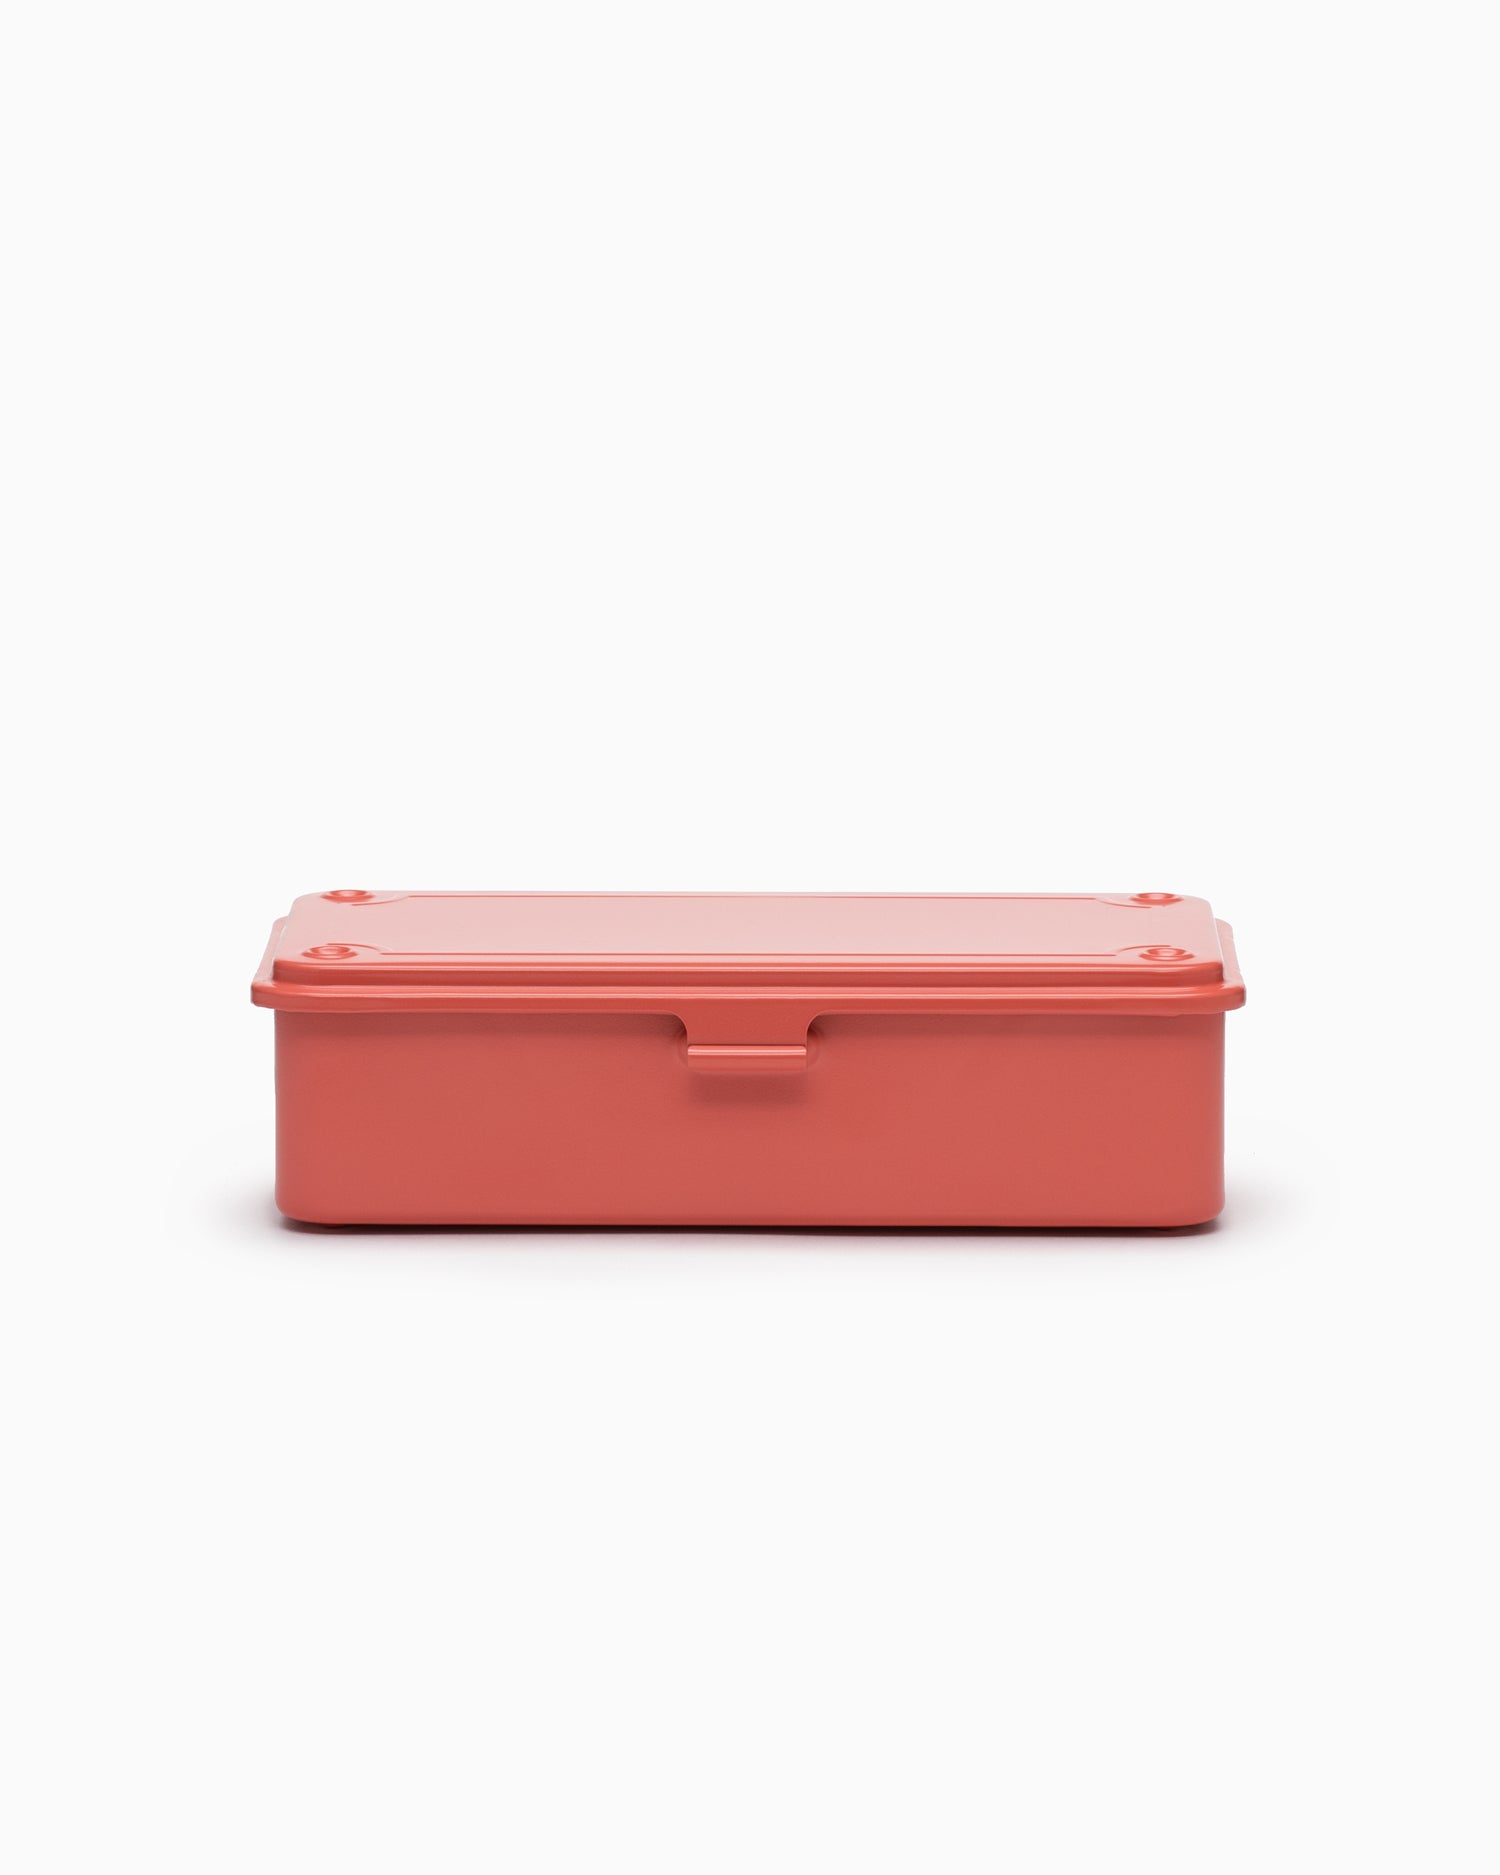 Toyo Steel Camber-Top Toolbox Y-350 - Living Coral